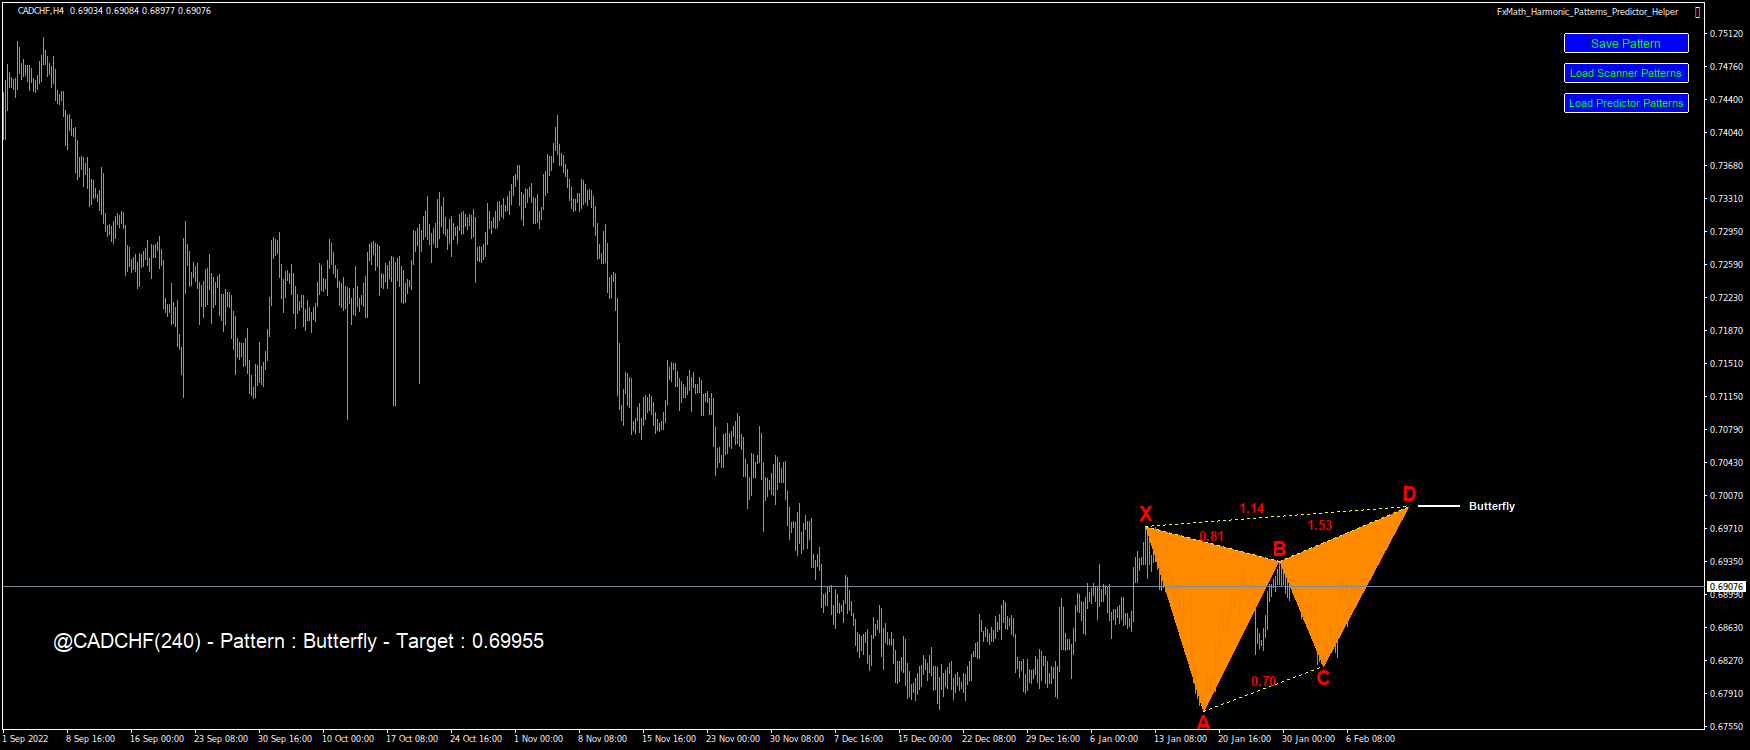 @CADCHF(240) – Pattern : Butterfly – Target : 0.69955-2023.02.07 10:08